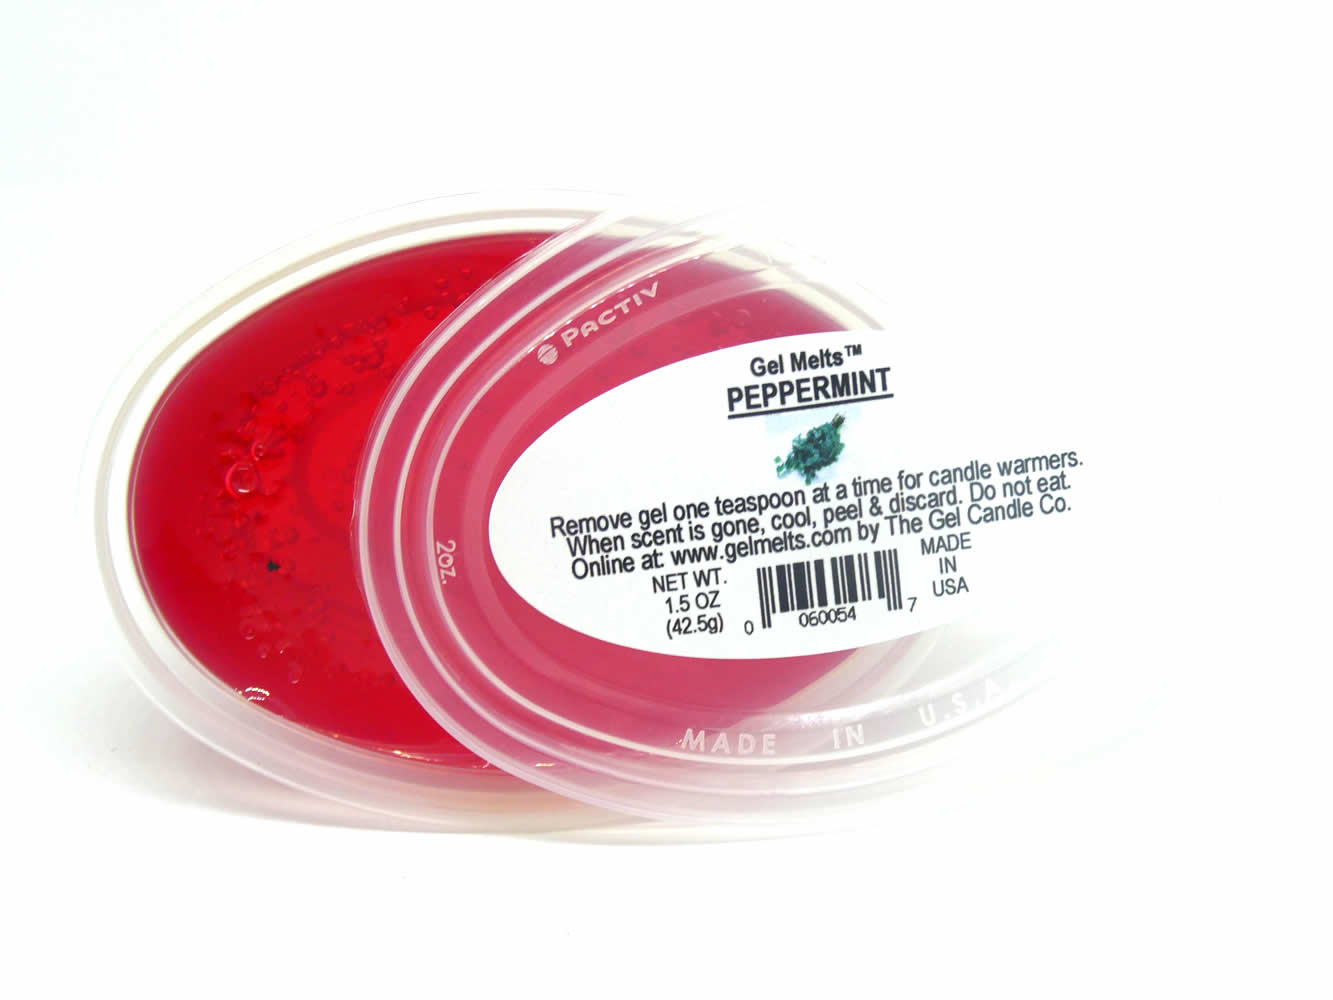 Peppermint scented Gel Melts™ Gel Wax for warmers - 3 pack